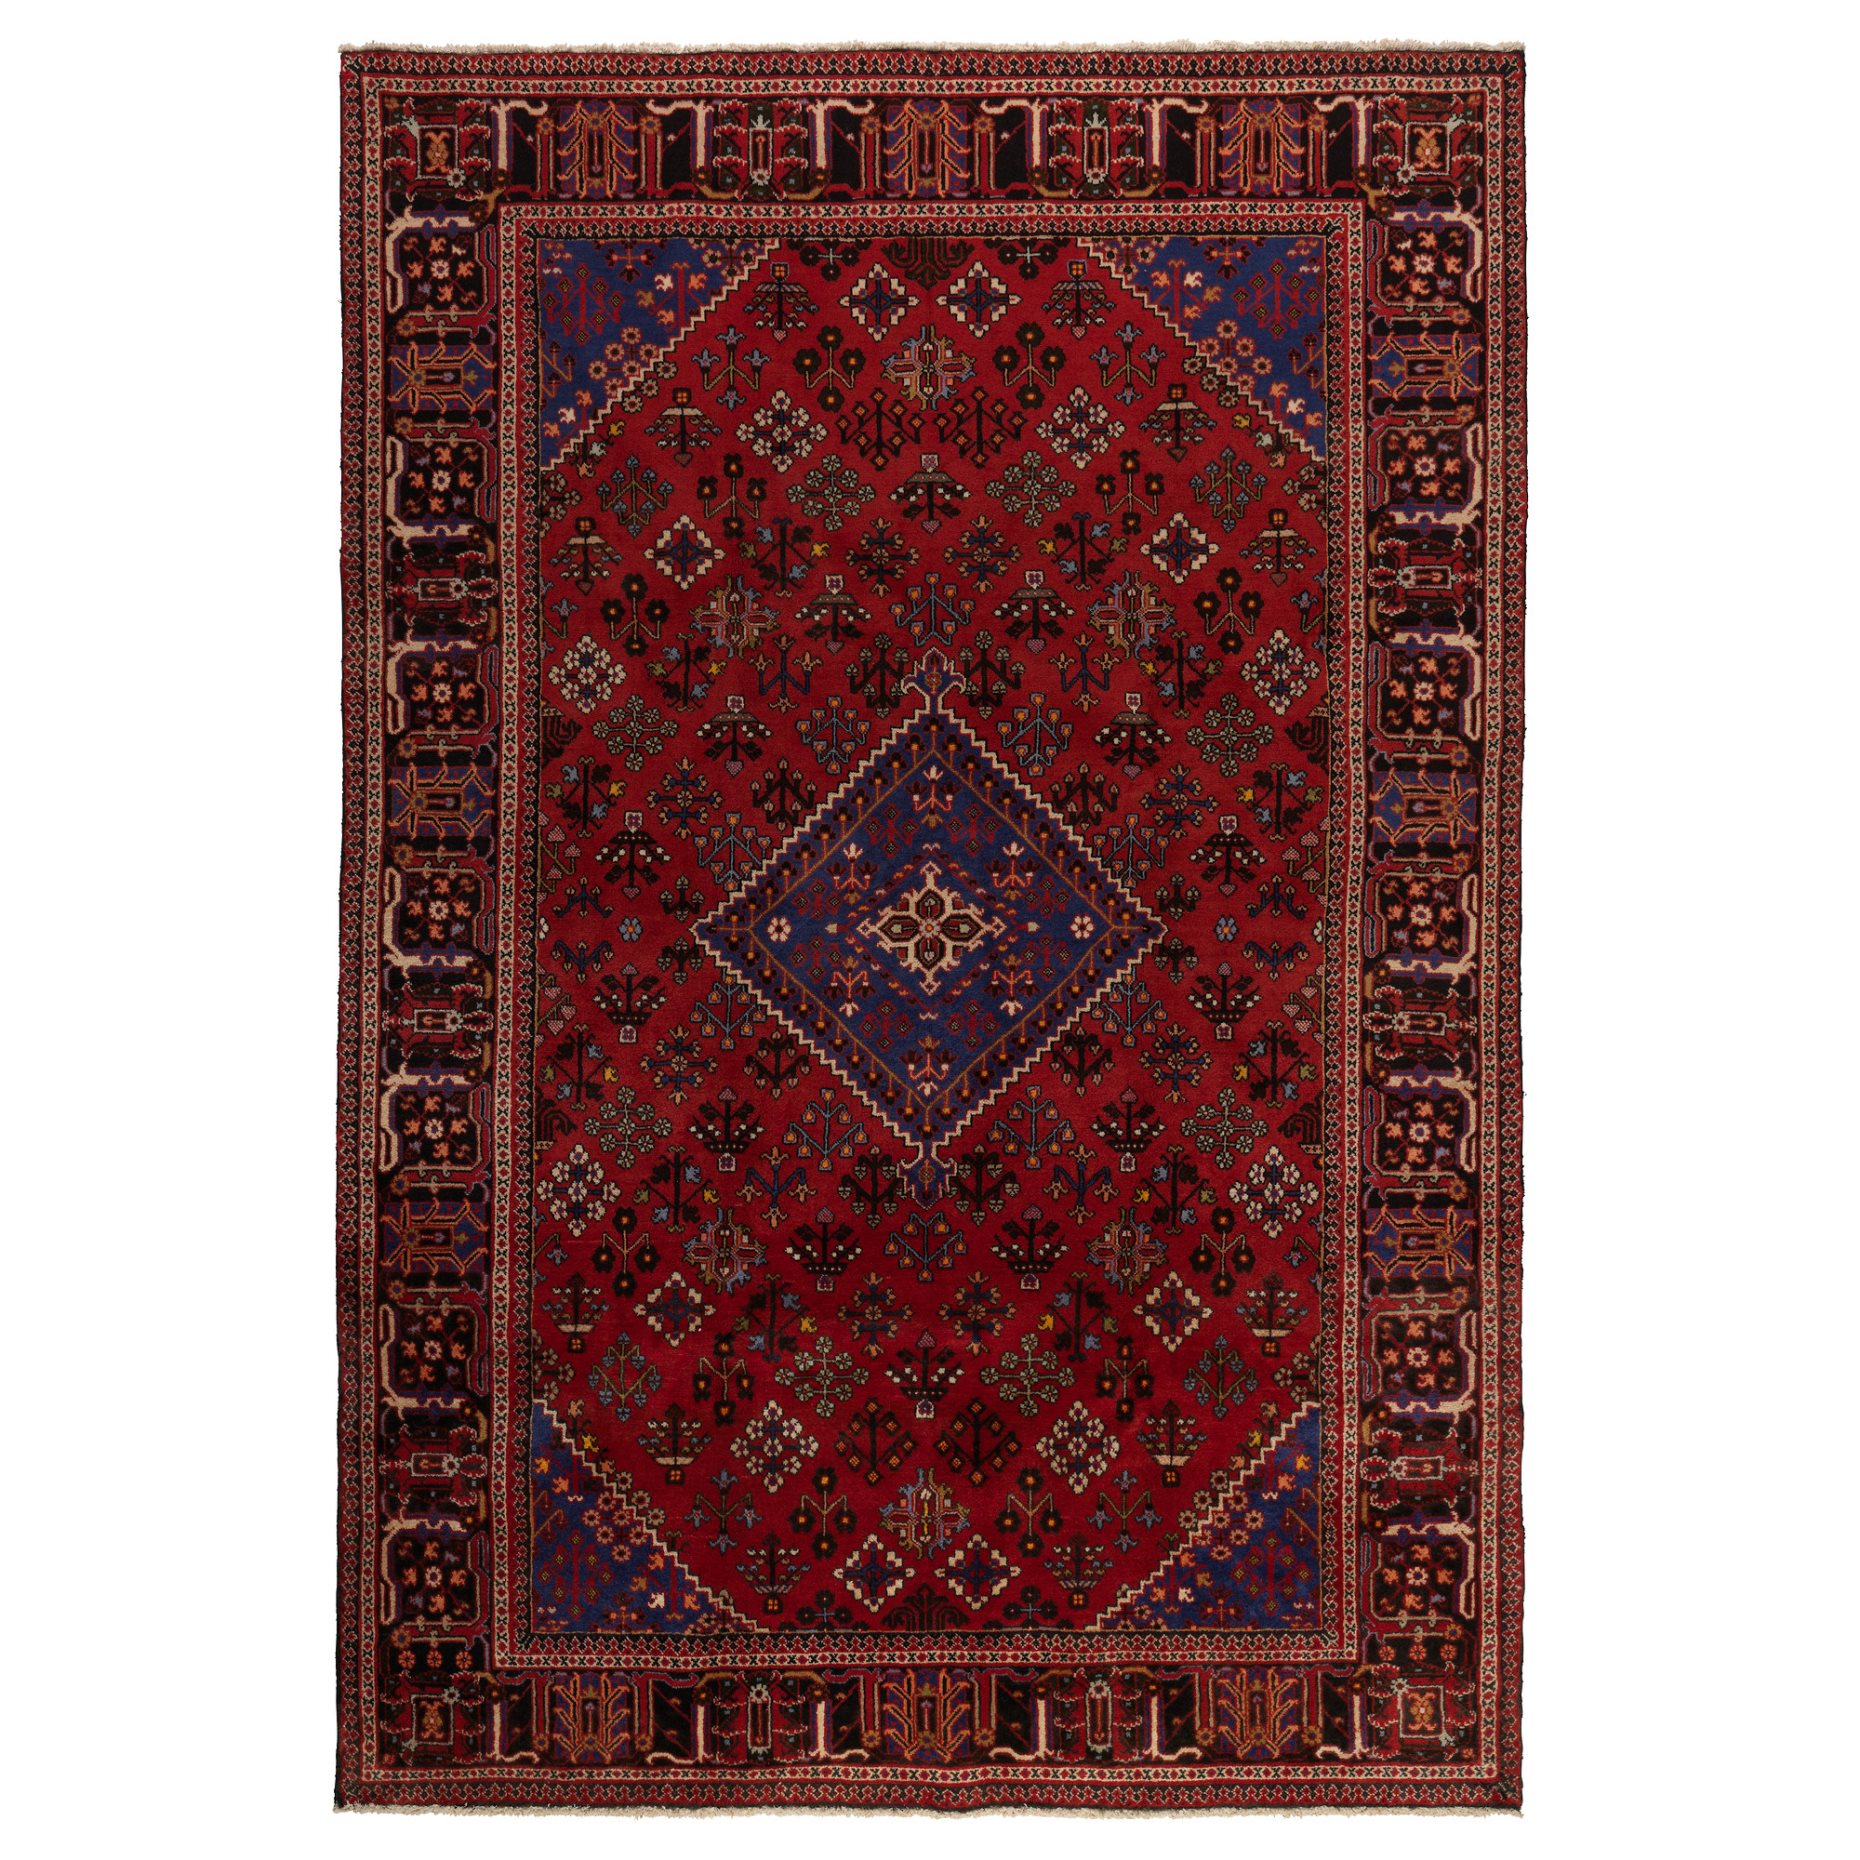 PERSISK MIX, rug low pile/handmade, 200x300 cm, 402.992.63